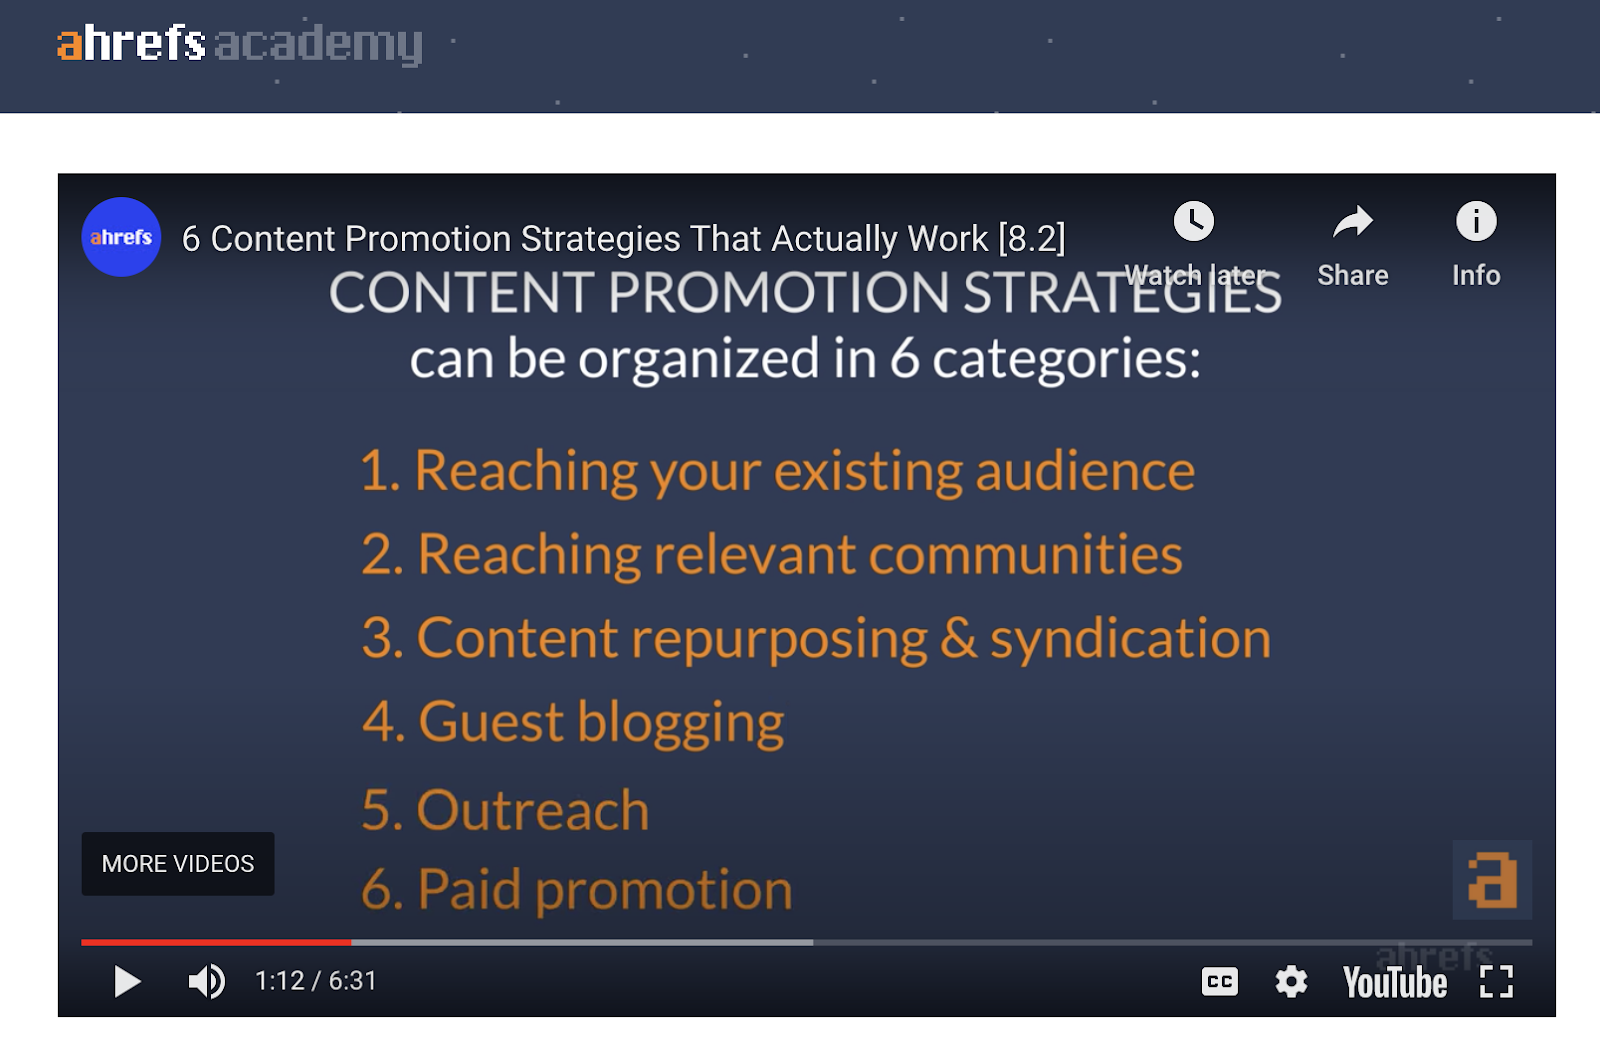 ahrefs academy content marketing course content promotion strategies